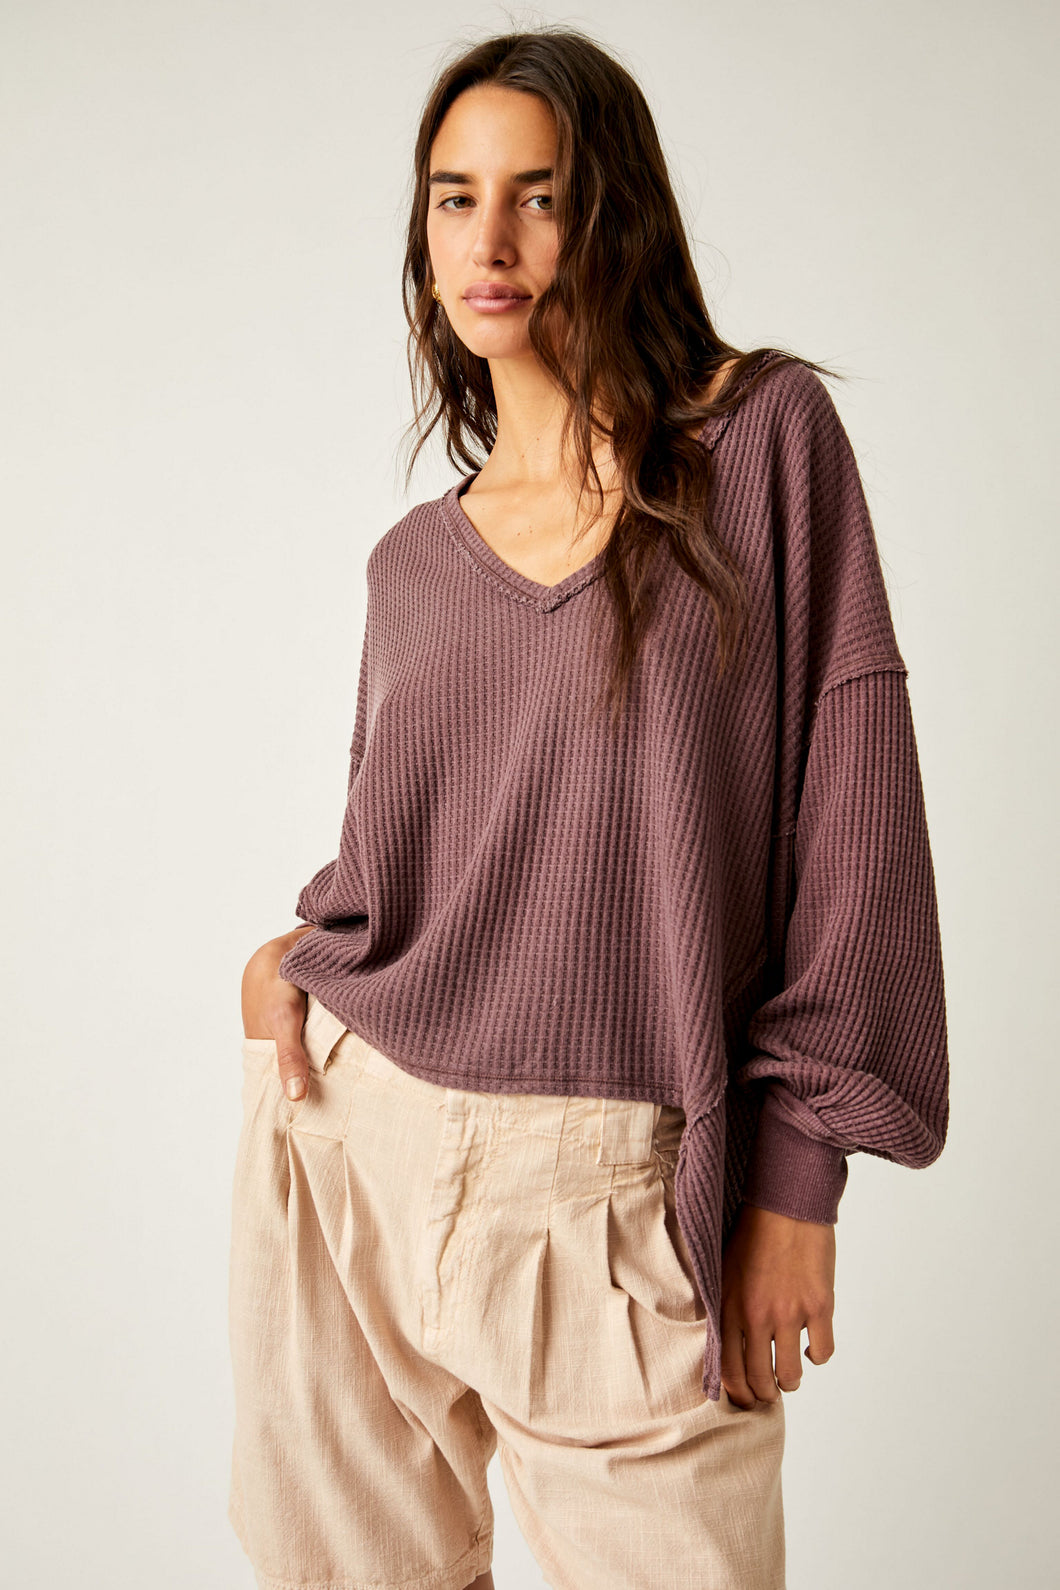 Free People Coraline Thermal in Chocolate